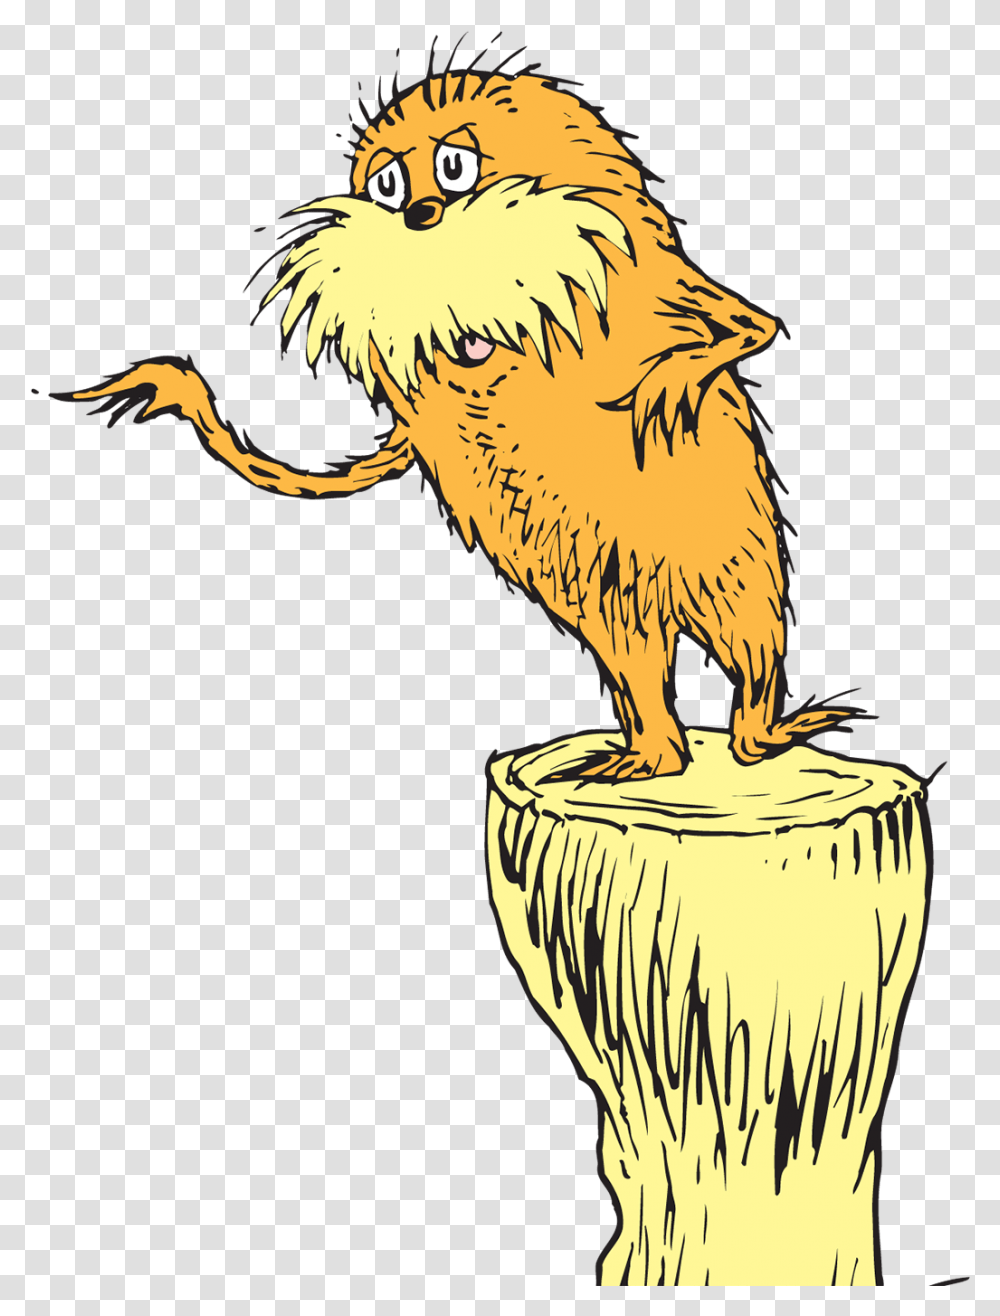 Download Clipart Resolution Lorax On Tree Stump, Vulture, Bird, Animal, Eagle Transparent Png